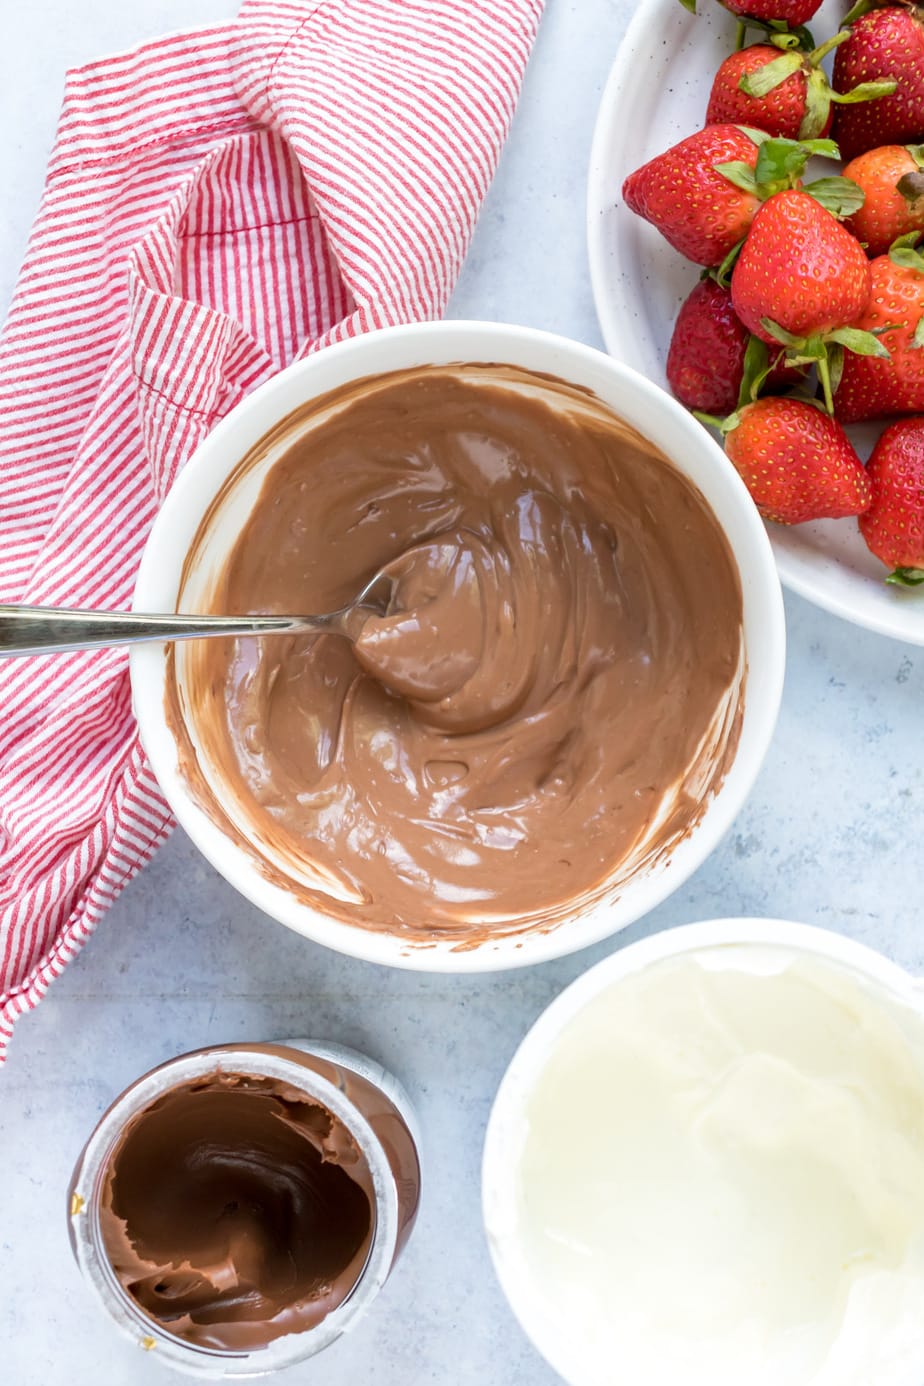 Mixing nutella and yogurt in a bowl.